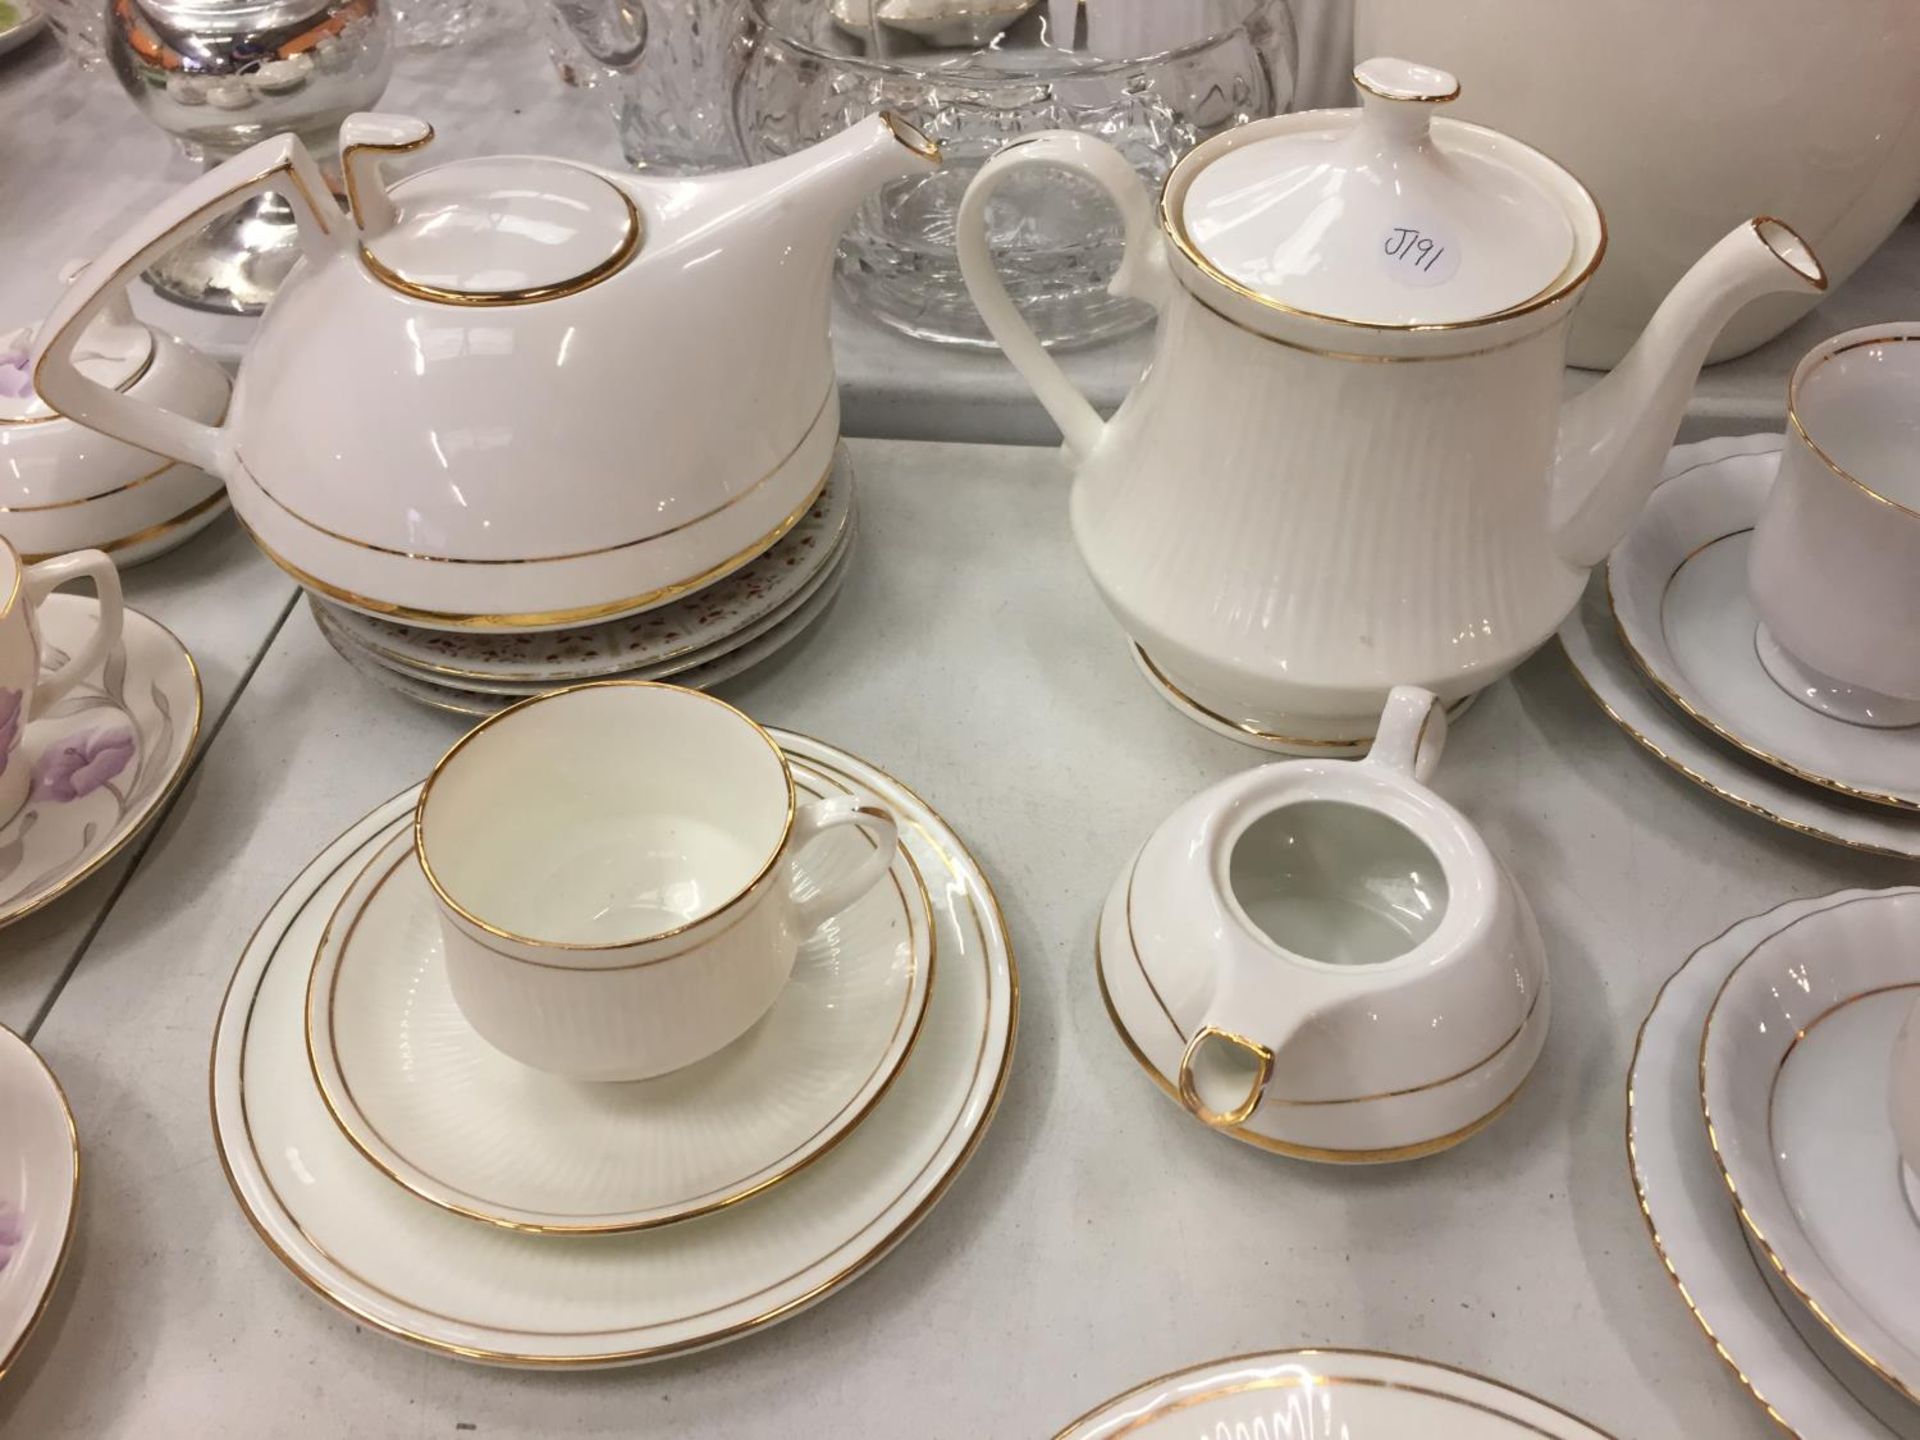 A LARGE COLLECTION OF VARIOUS TEA CUPS AND SAUCERS OF VARIOUS DESIGNS AND TWO TEAPOTS - Image 4 of 4